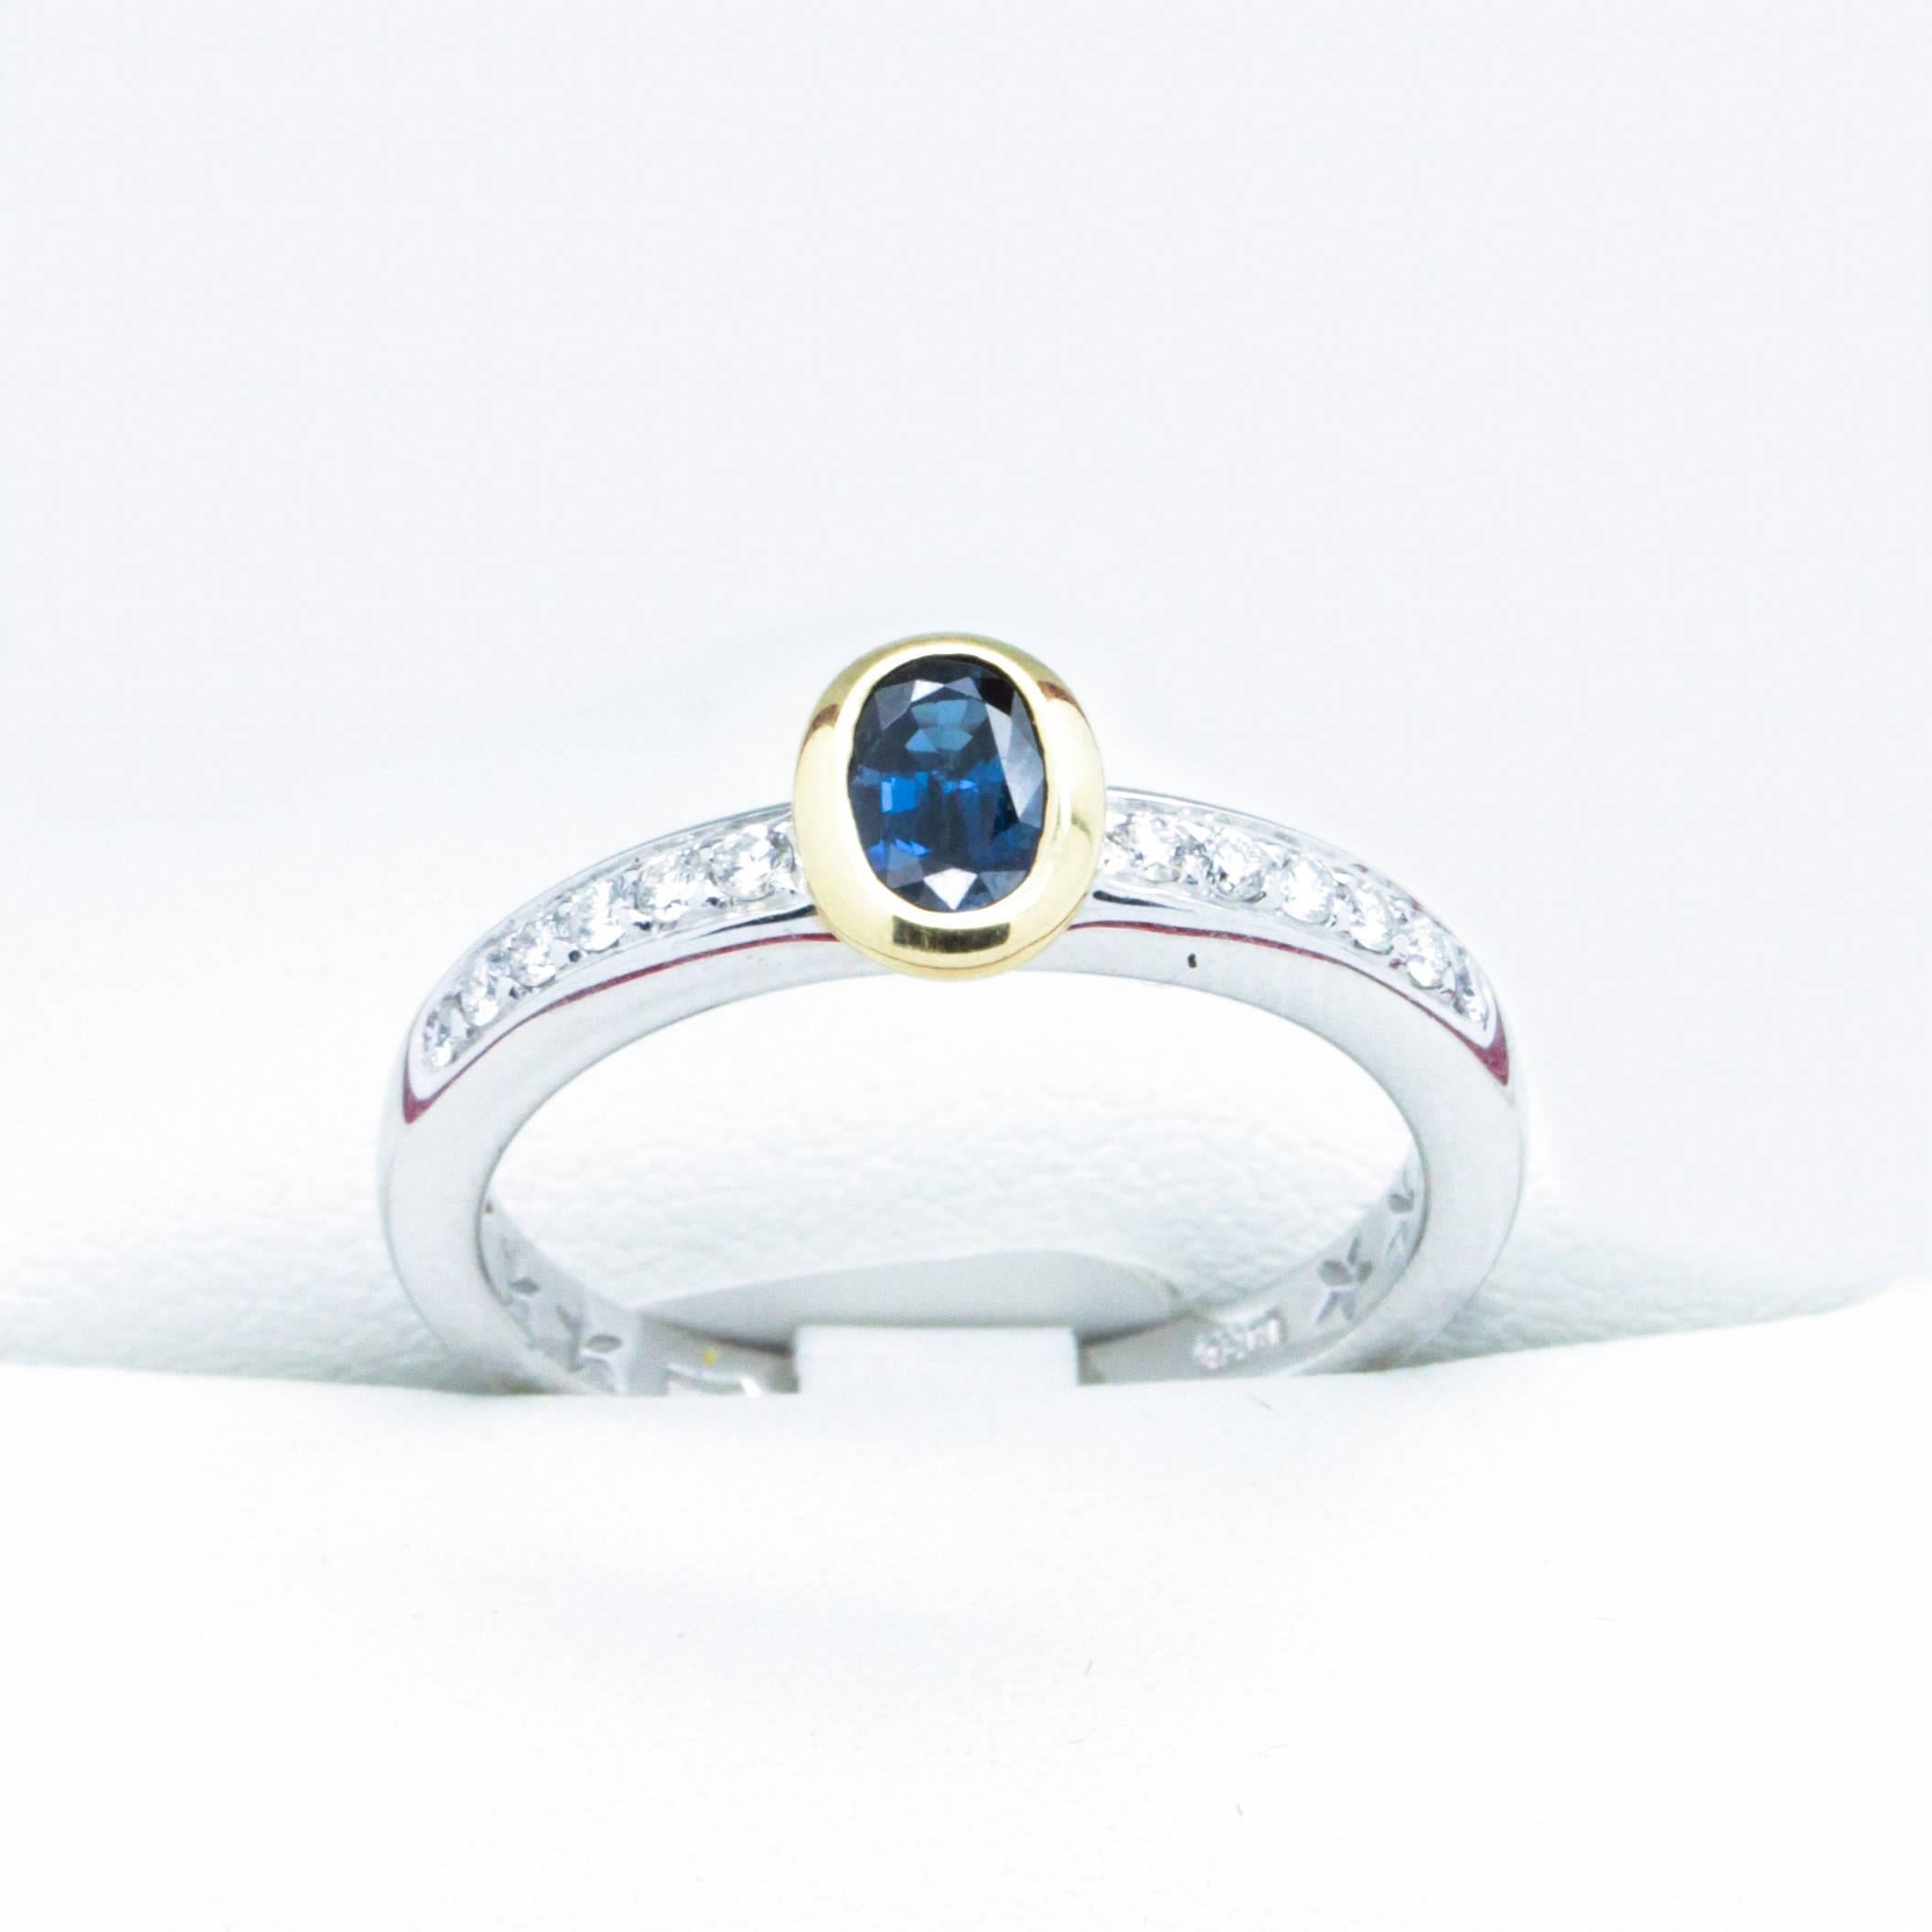 Sapphire and Diamond 18ct Gold Engagement Ring.  Lovely!

A Lovely 18K Yellow and White gold ring, featuring one oval- cut Blue Sapphire with row of Full- cut Diamonds either side of the Sapphire. 

One rub over set oval shaped blue Sapphire, colour